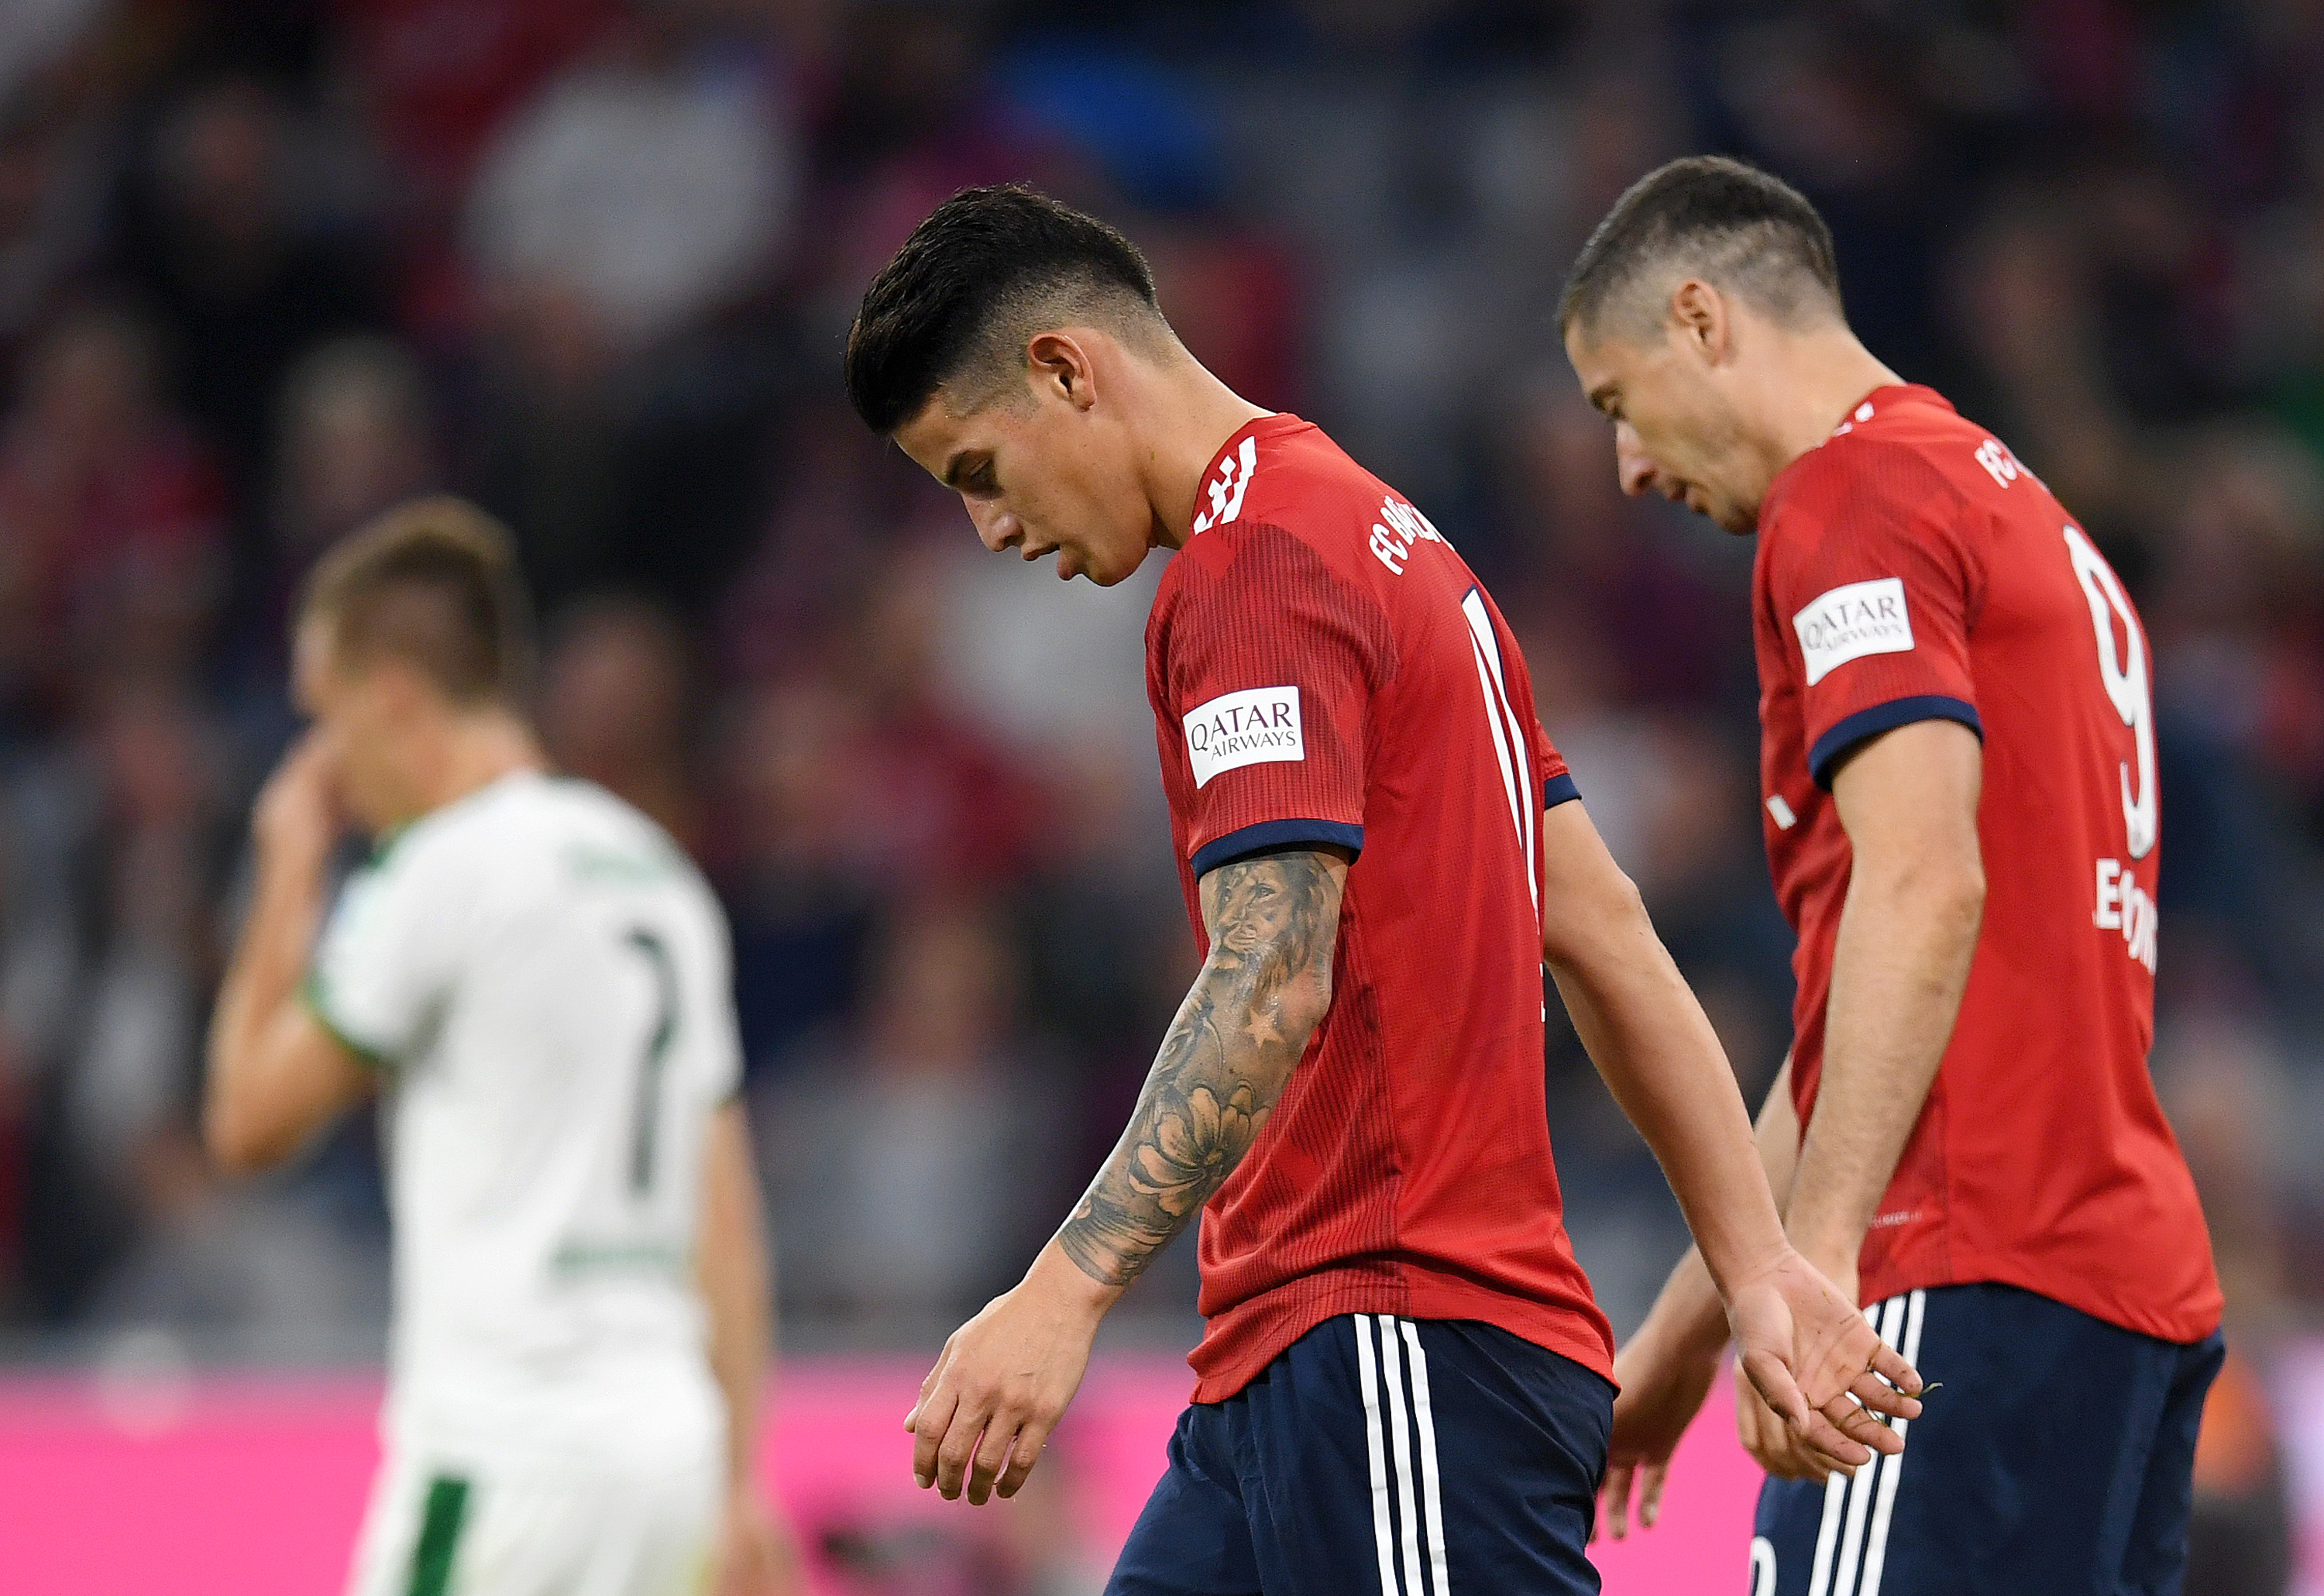 MUNICH, GERMANY - OCTOBER 06:  James Rodriguez and Robert Lewandowski of Bayern Munich look dejected during the Bundesliga match between FC Bayern Muenchen and Borussia Moenchengladbach at Allianz Arena on October 6, 2018 in Munich, Germany.  (Photo by Matthias Hangst/Bongarts/Getty Images)